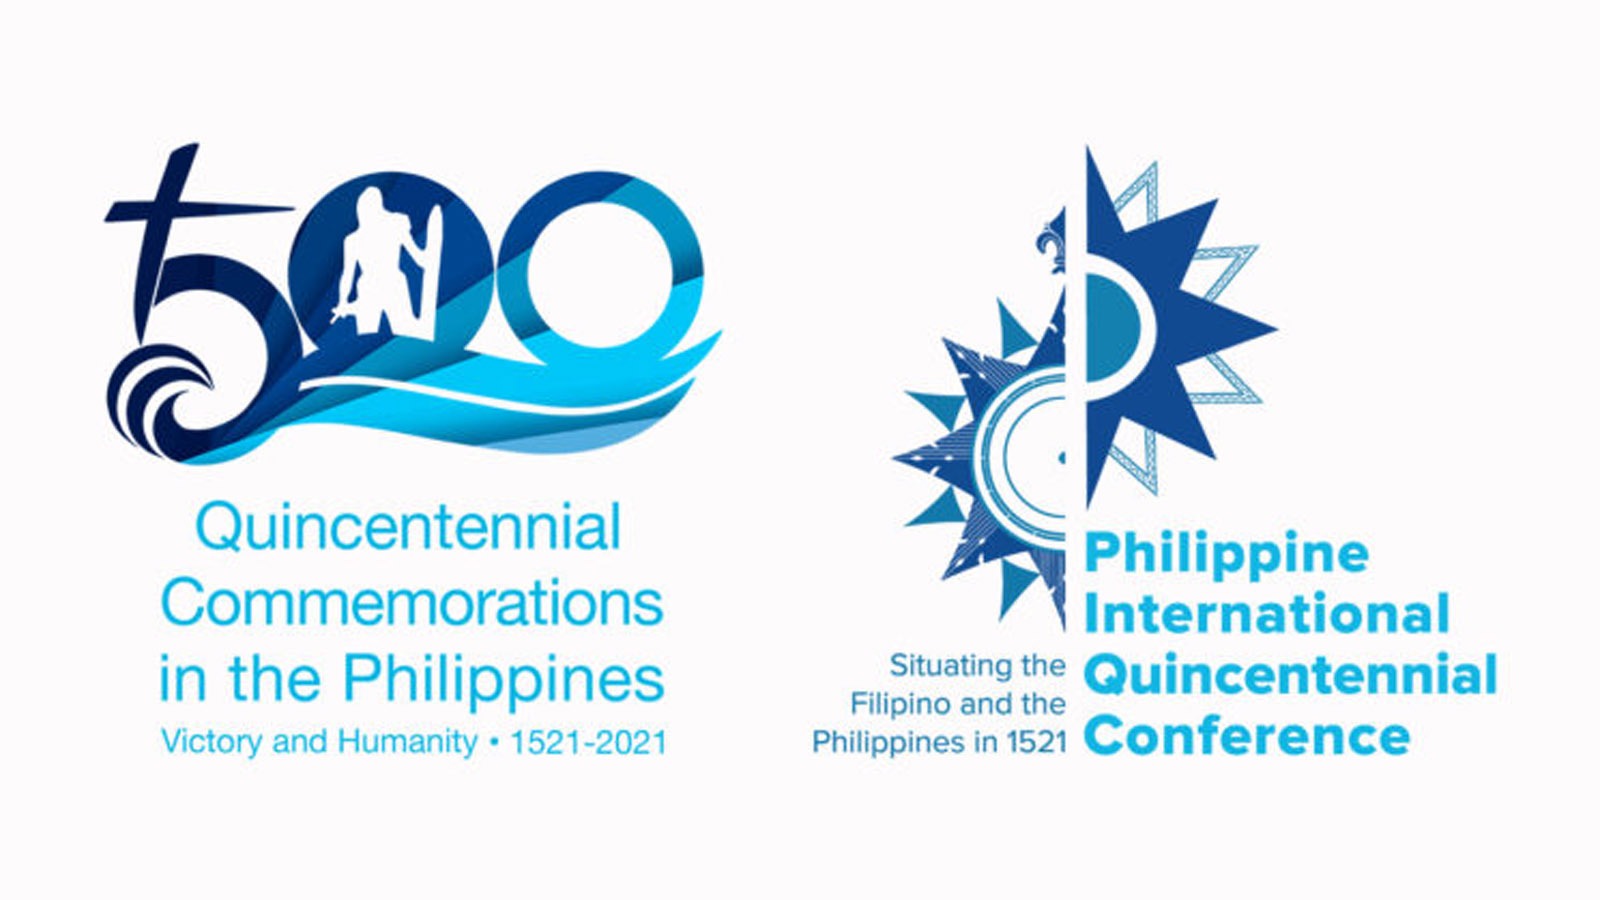 Philippine International Quincentennial Conference